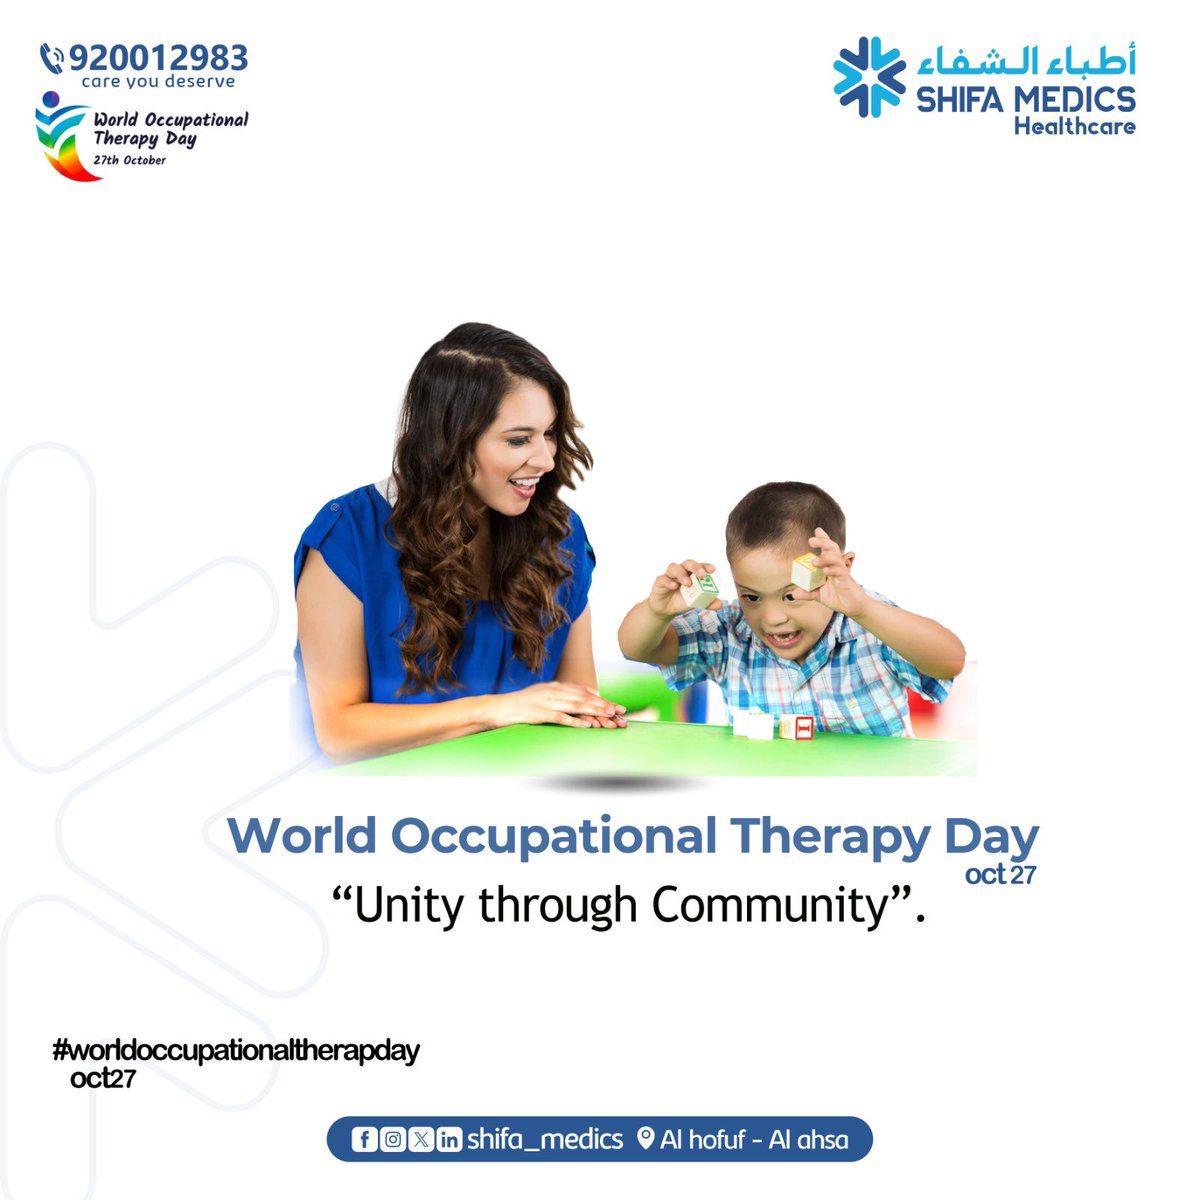 World Occupation Therapy Day 
oct 27

#occupationaltherapy 
#shifa_medics
#healthcare
#alhofuf #alomairi #alahsa #saudiarabia
#medical #clinic #healthcare #medical_services
#iqama
#medicalfitness
#general_practitioner #dentist
#physiotherapyday